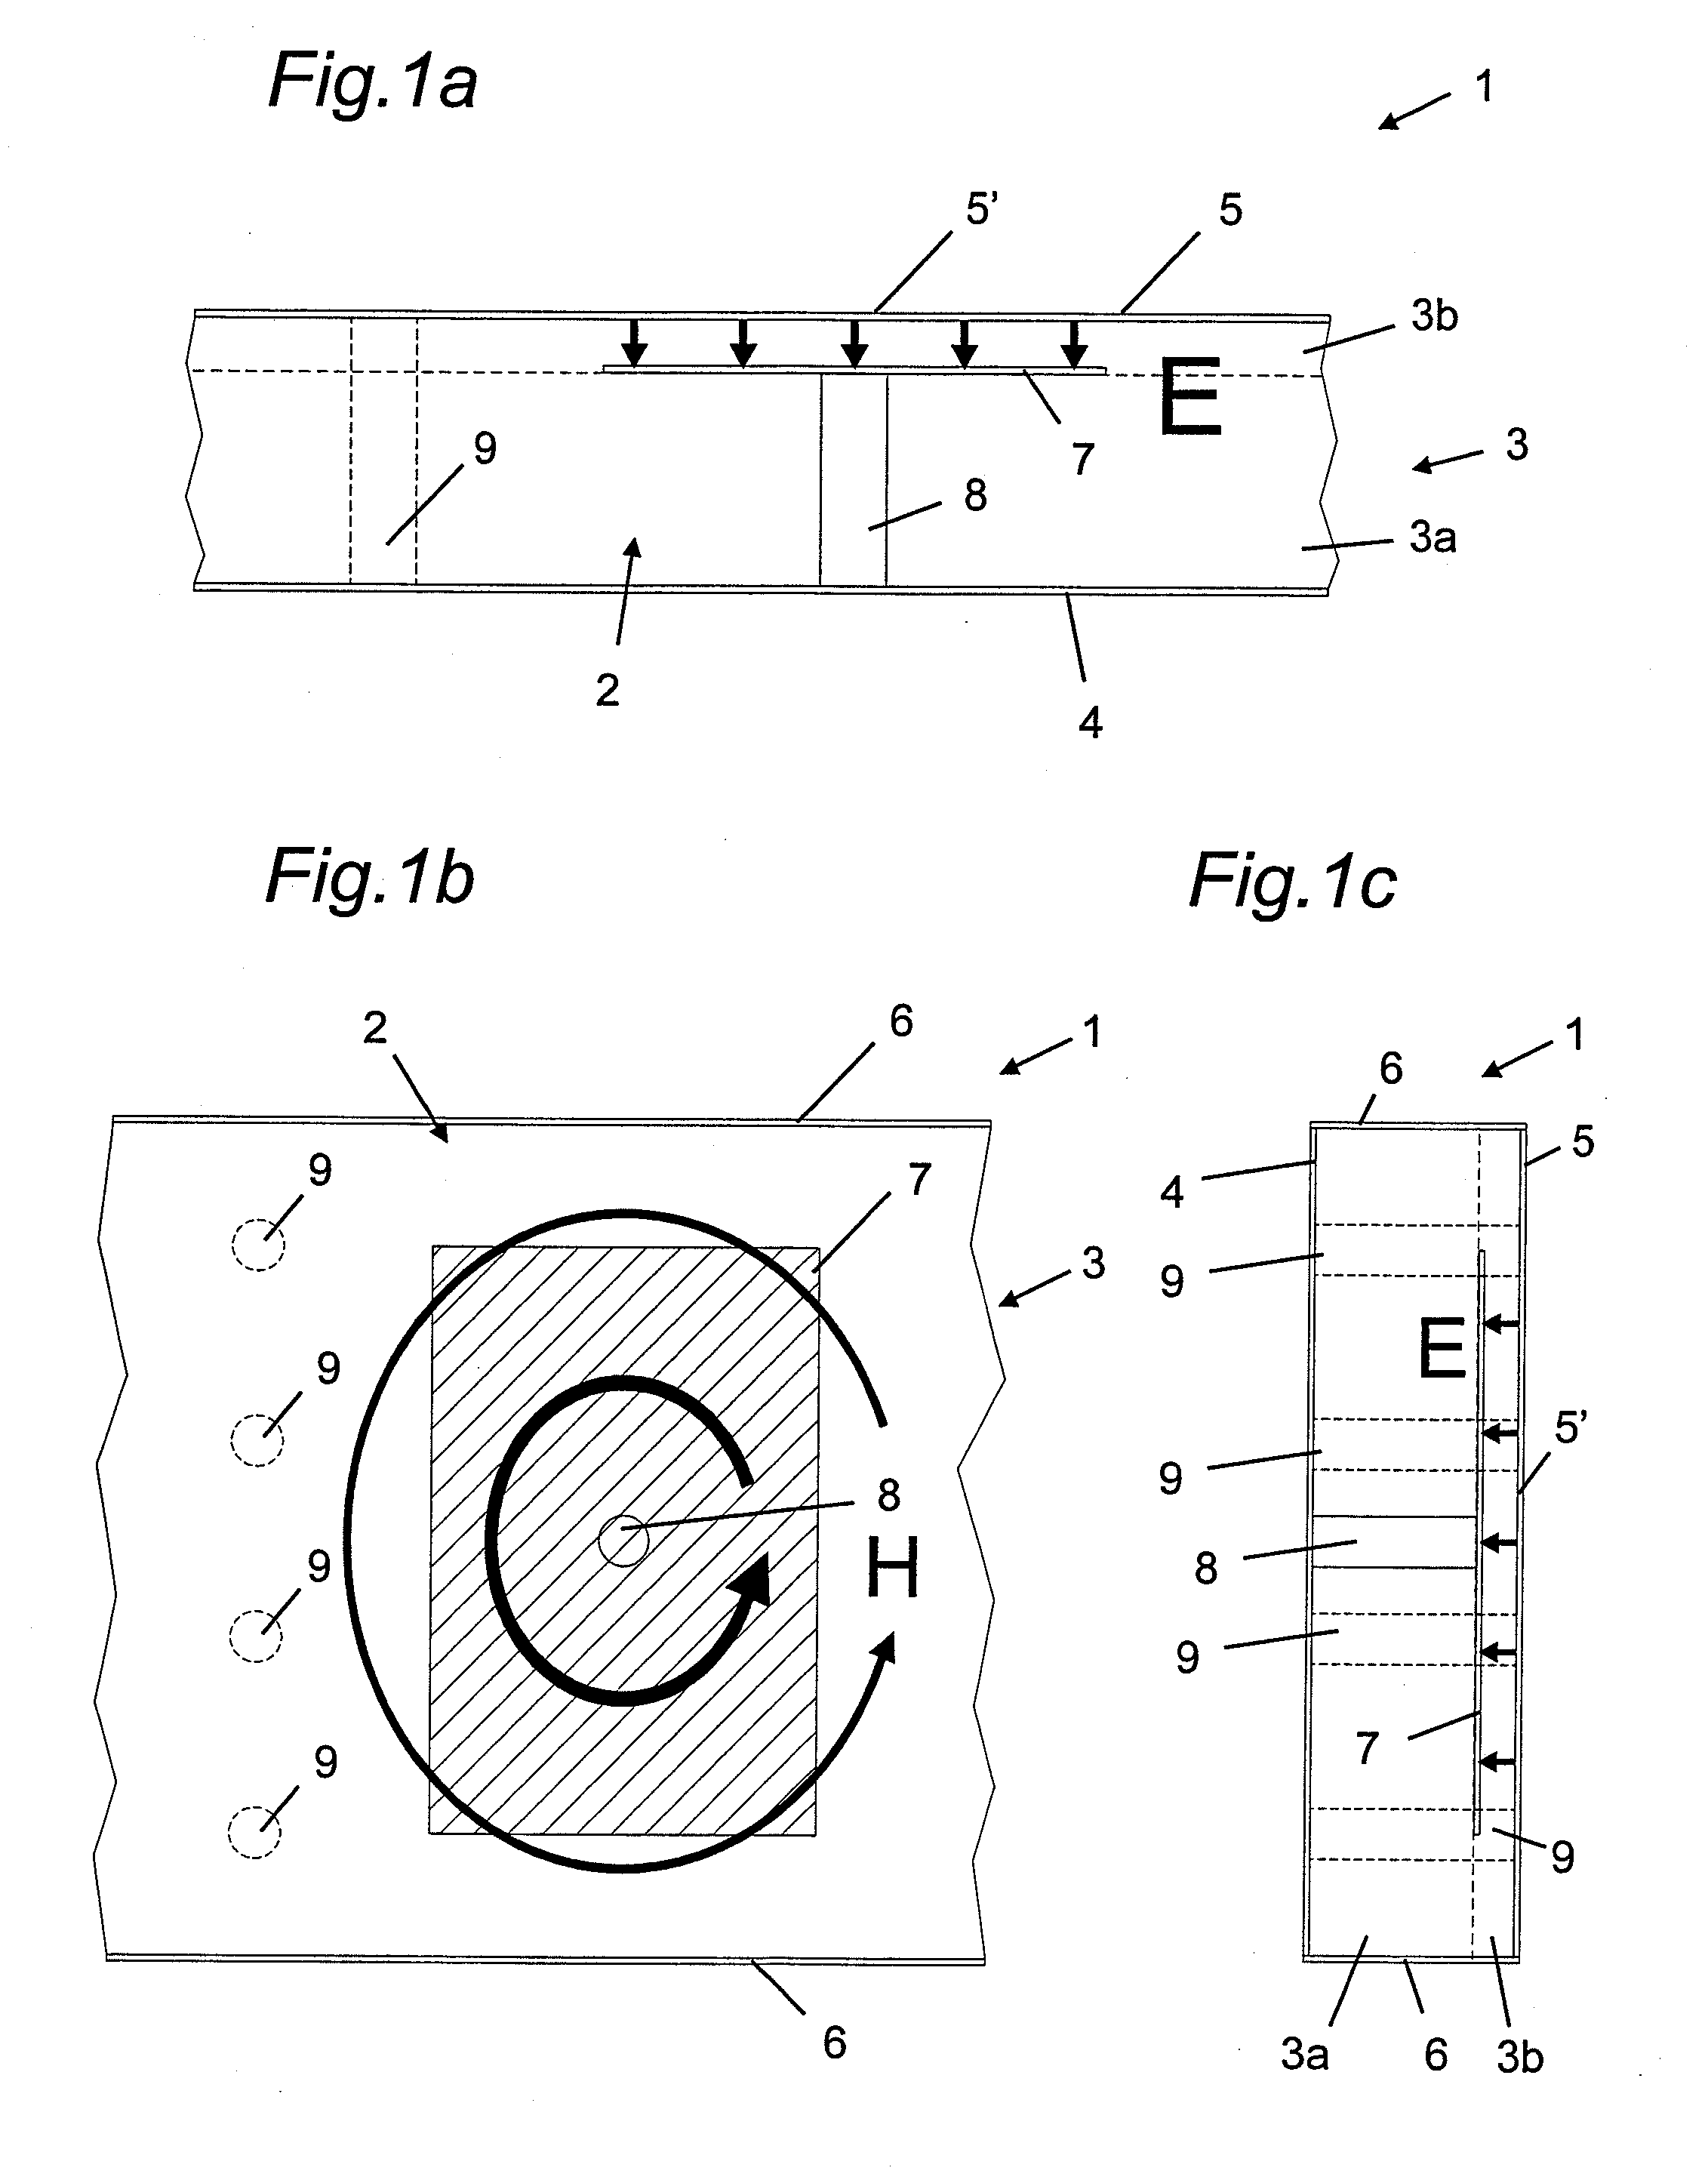 Laminated RF device with vertical resonators